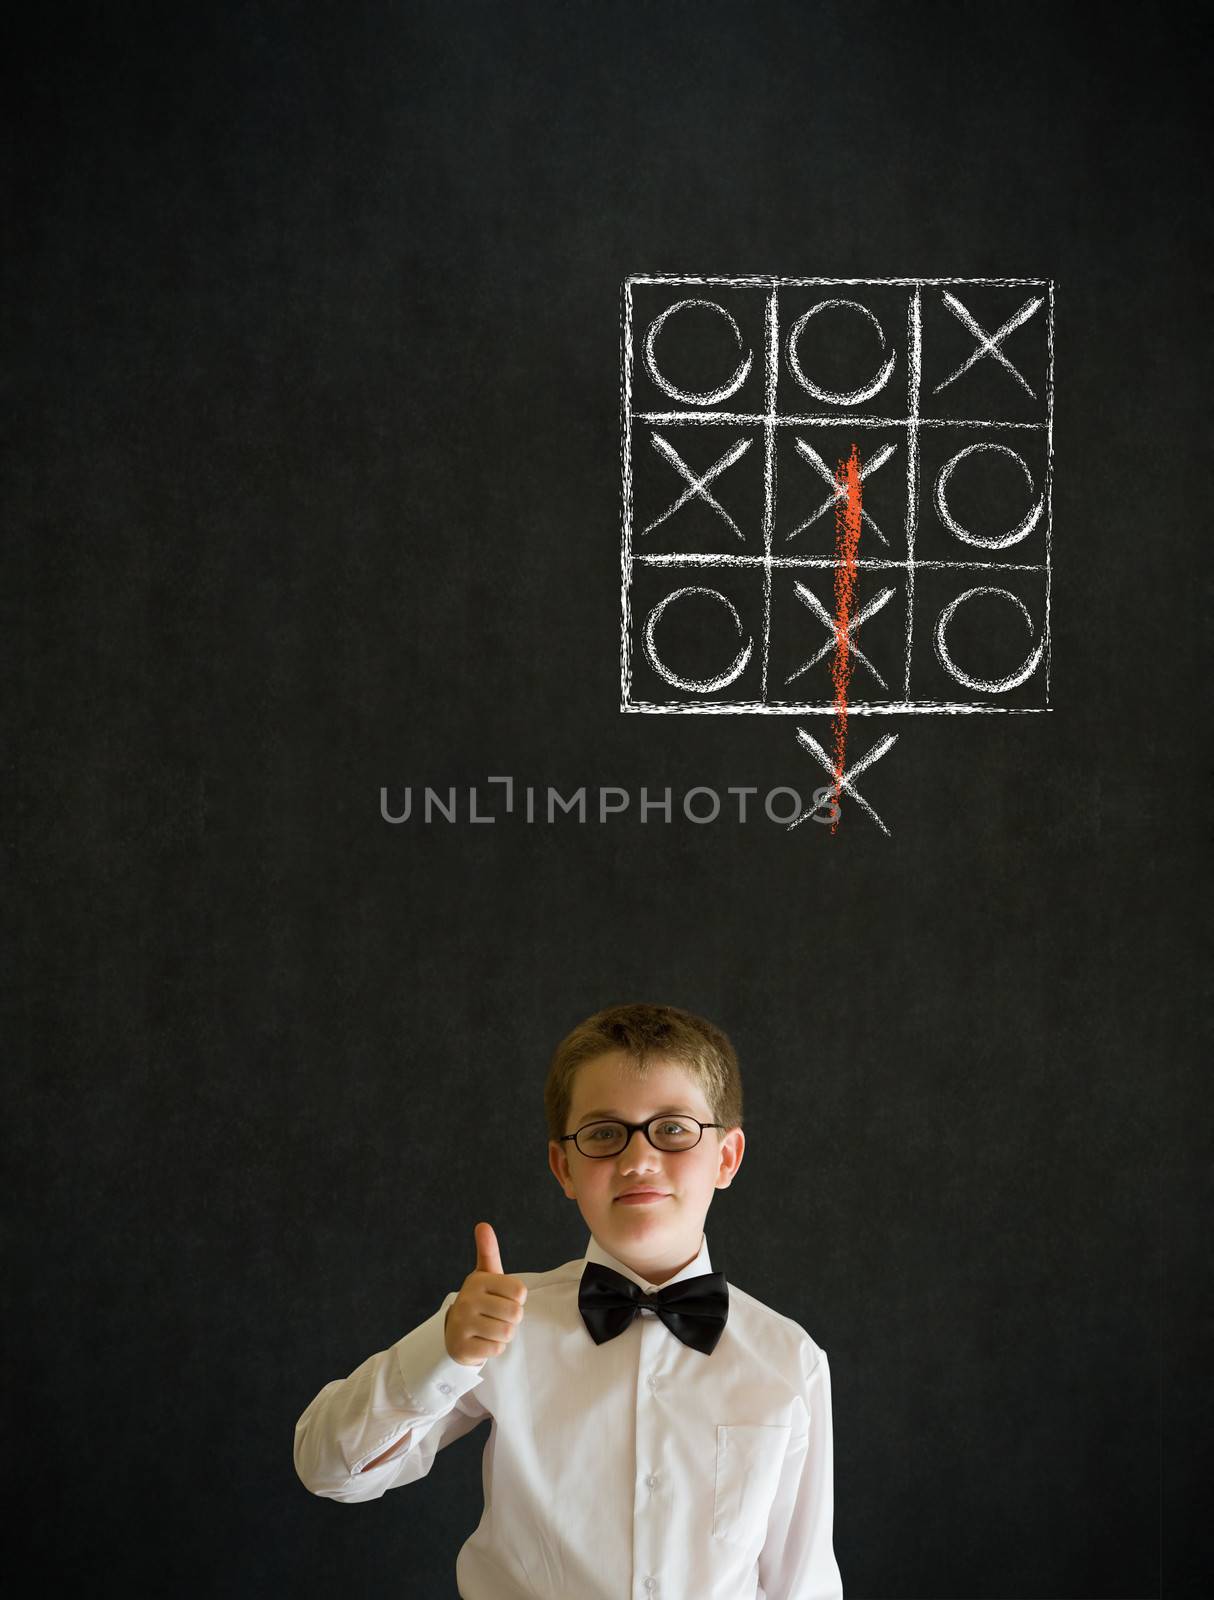 Thumbs up boy dressed up as business man with thinking out of the box tic tac toe concept on blackboard background